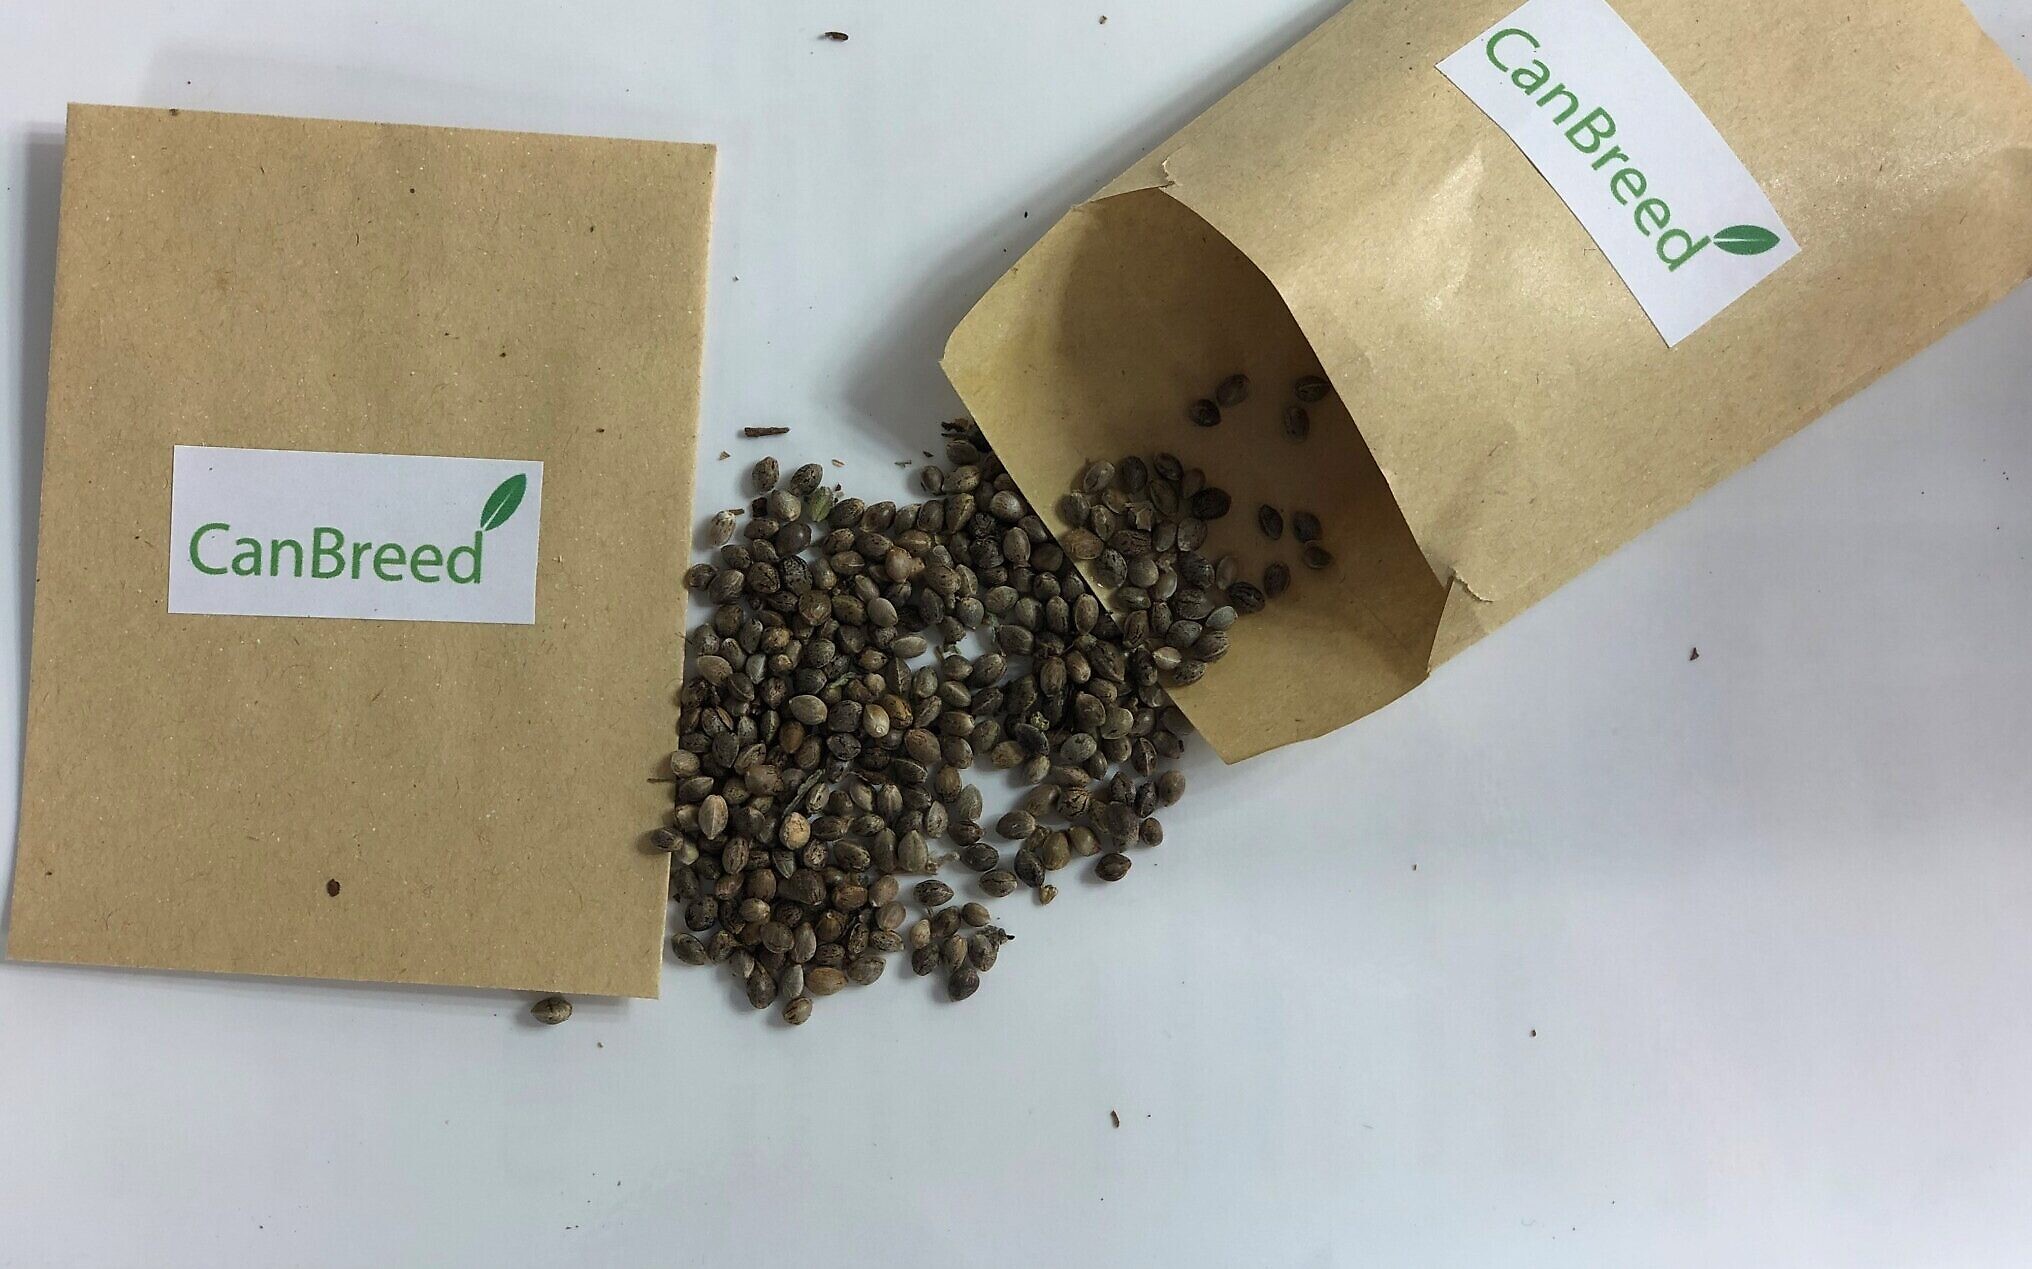 Why are Seeds Important When it Comes to Cannabis?